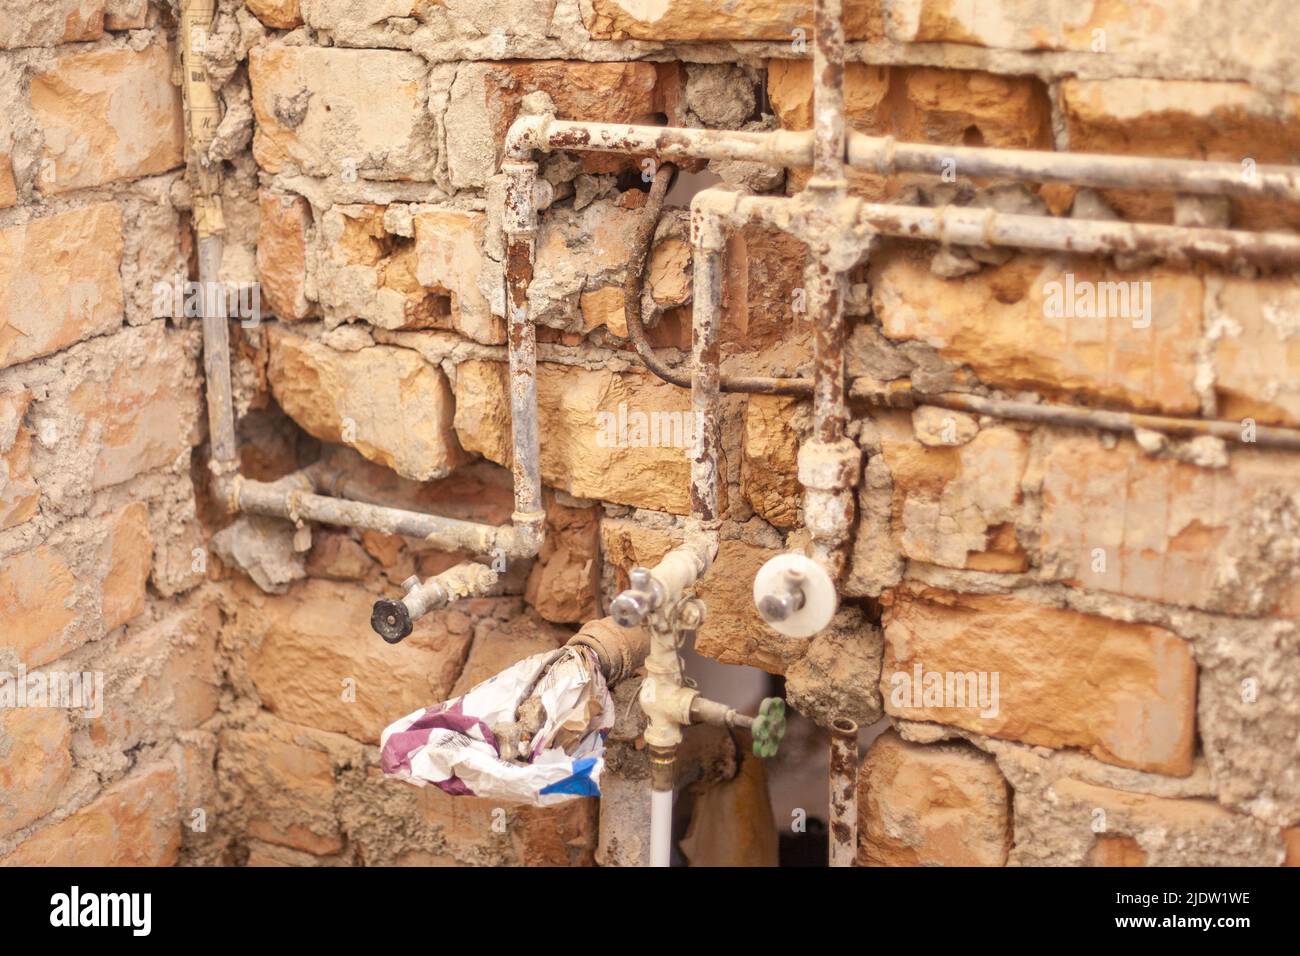 Old rusty water pipes and sewage pipe exposed in an old building Stock Photo